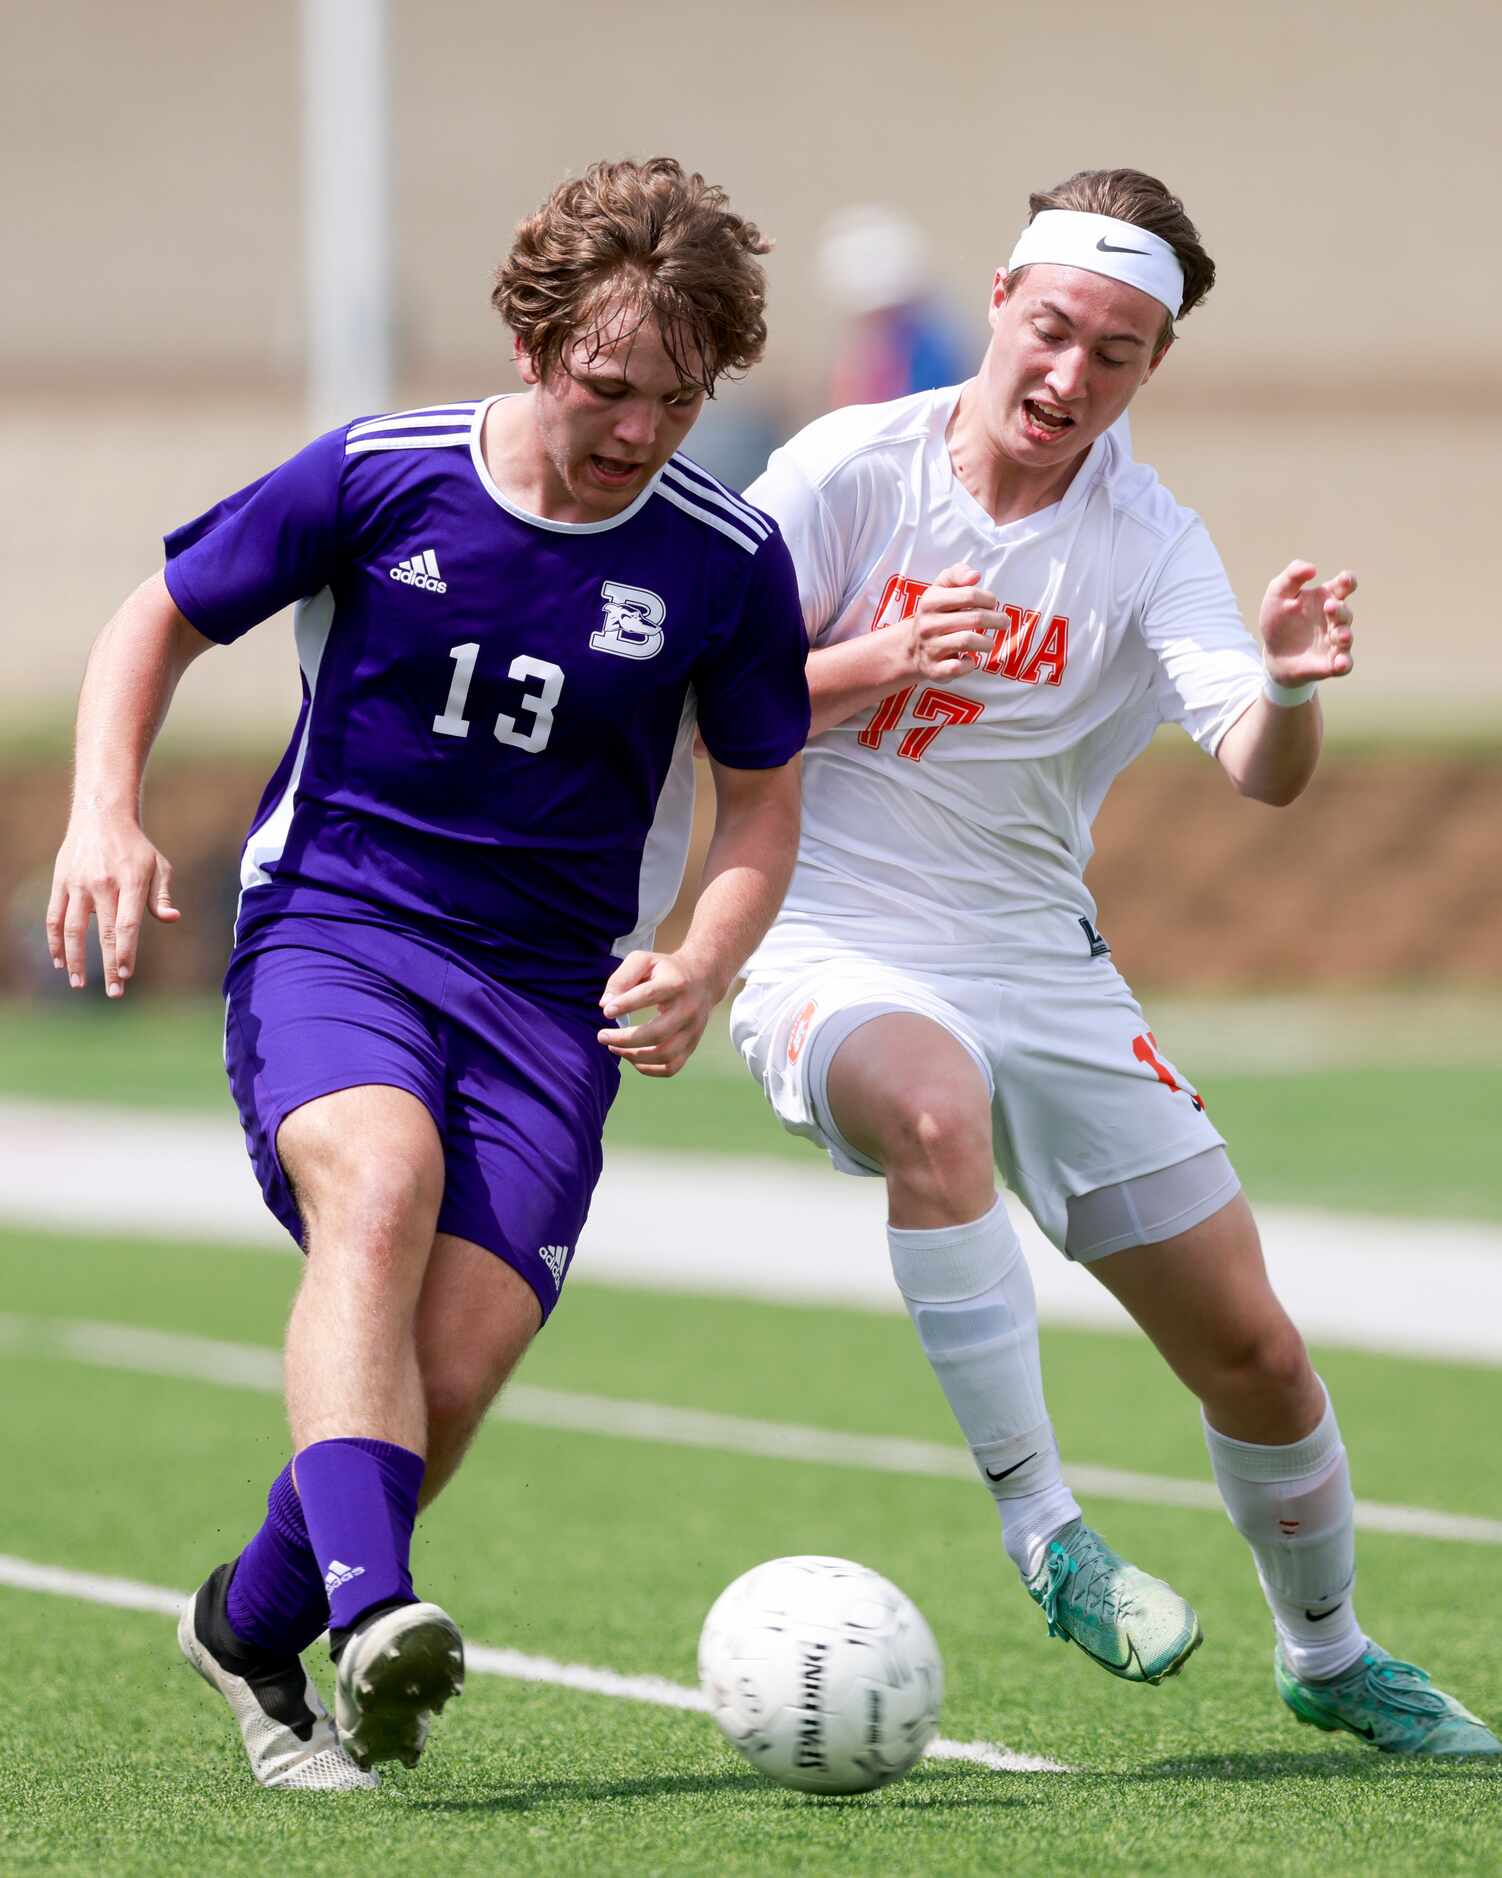 Boerne’s Logan Walter (13) and Celina defender William Brown (17) reach for a loose ball...